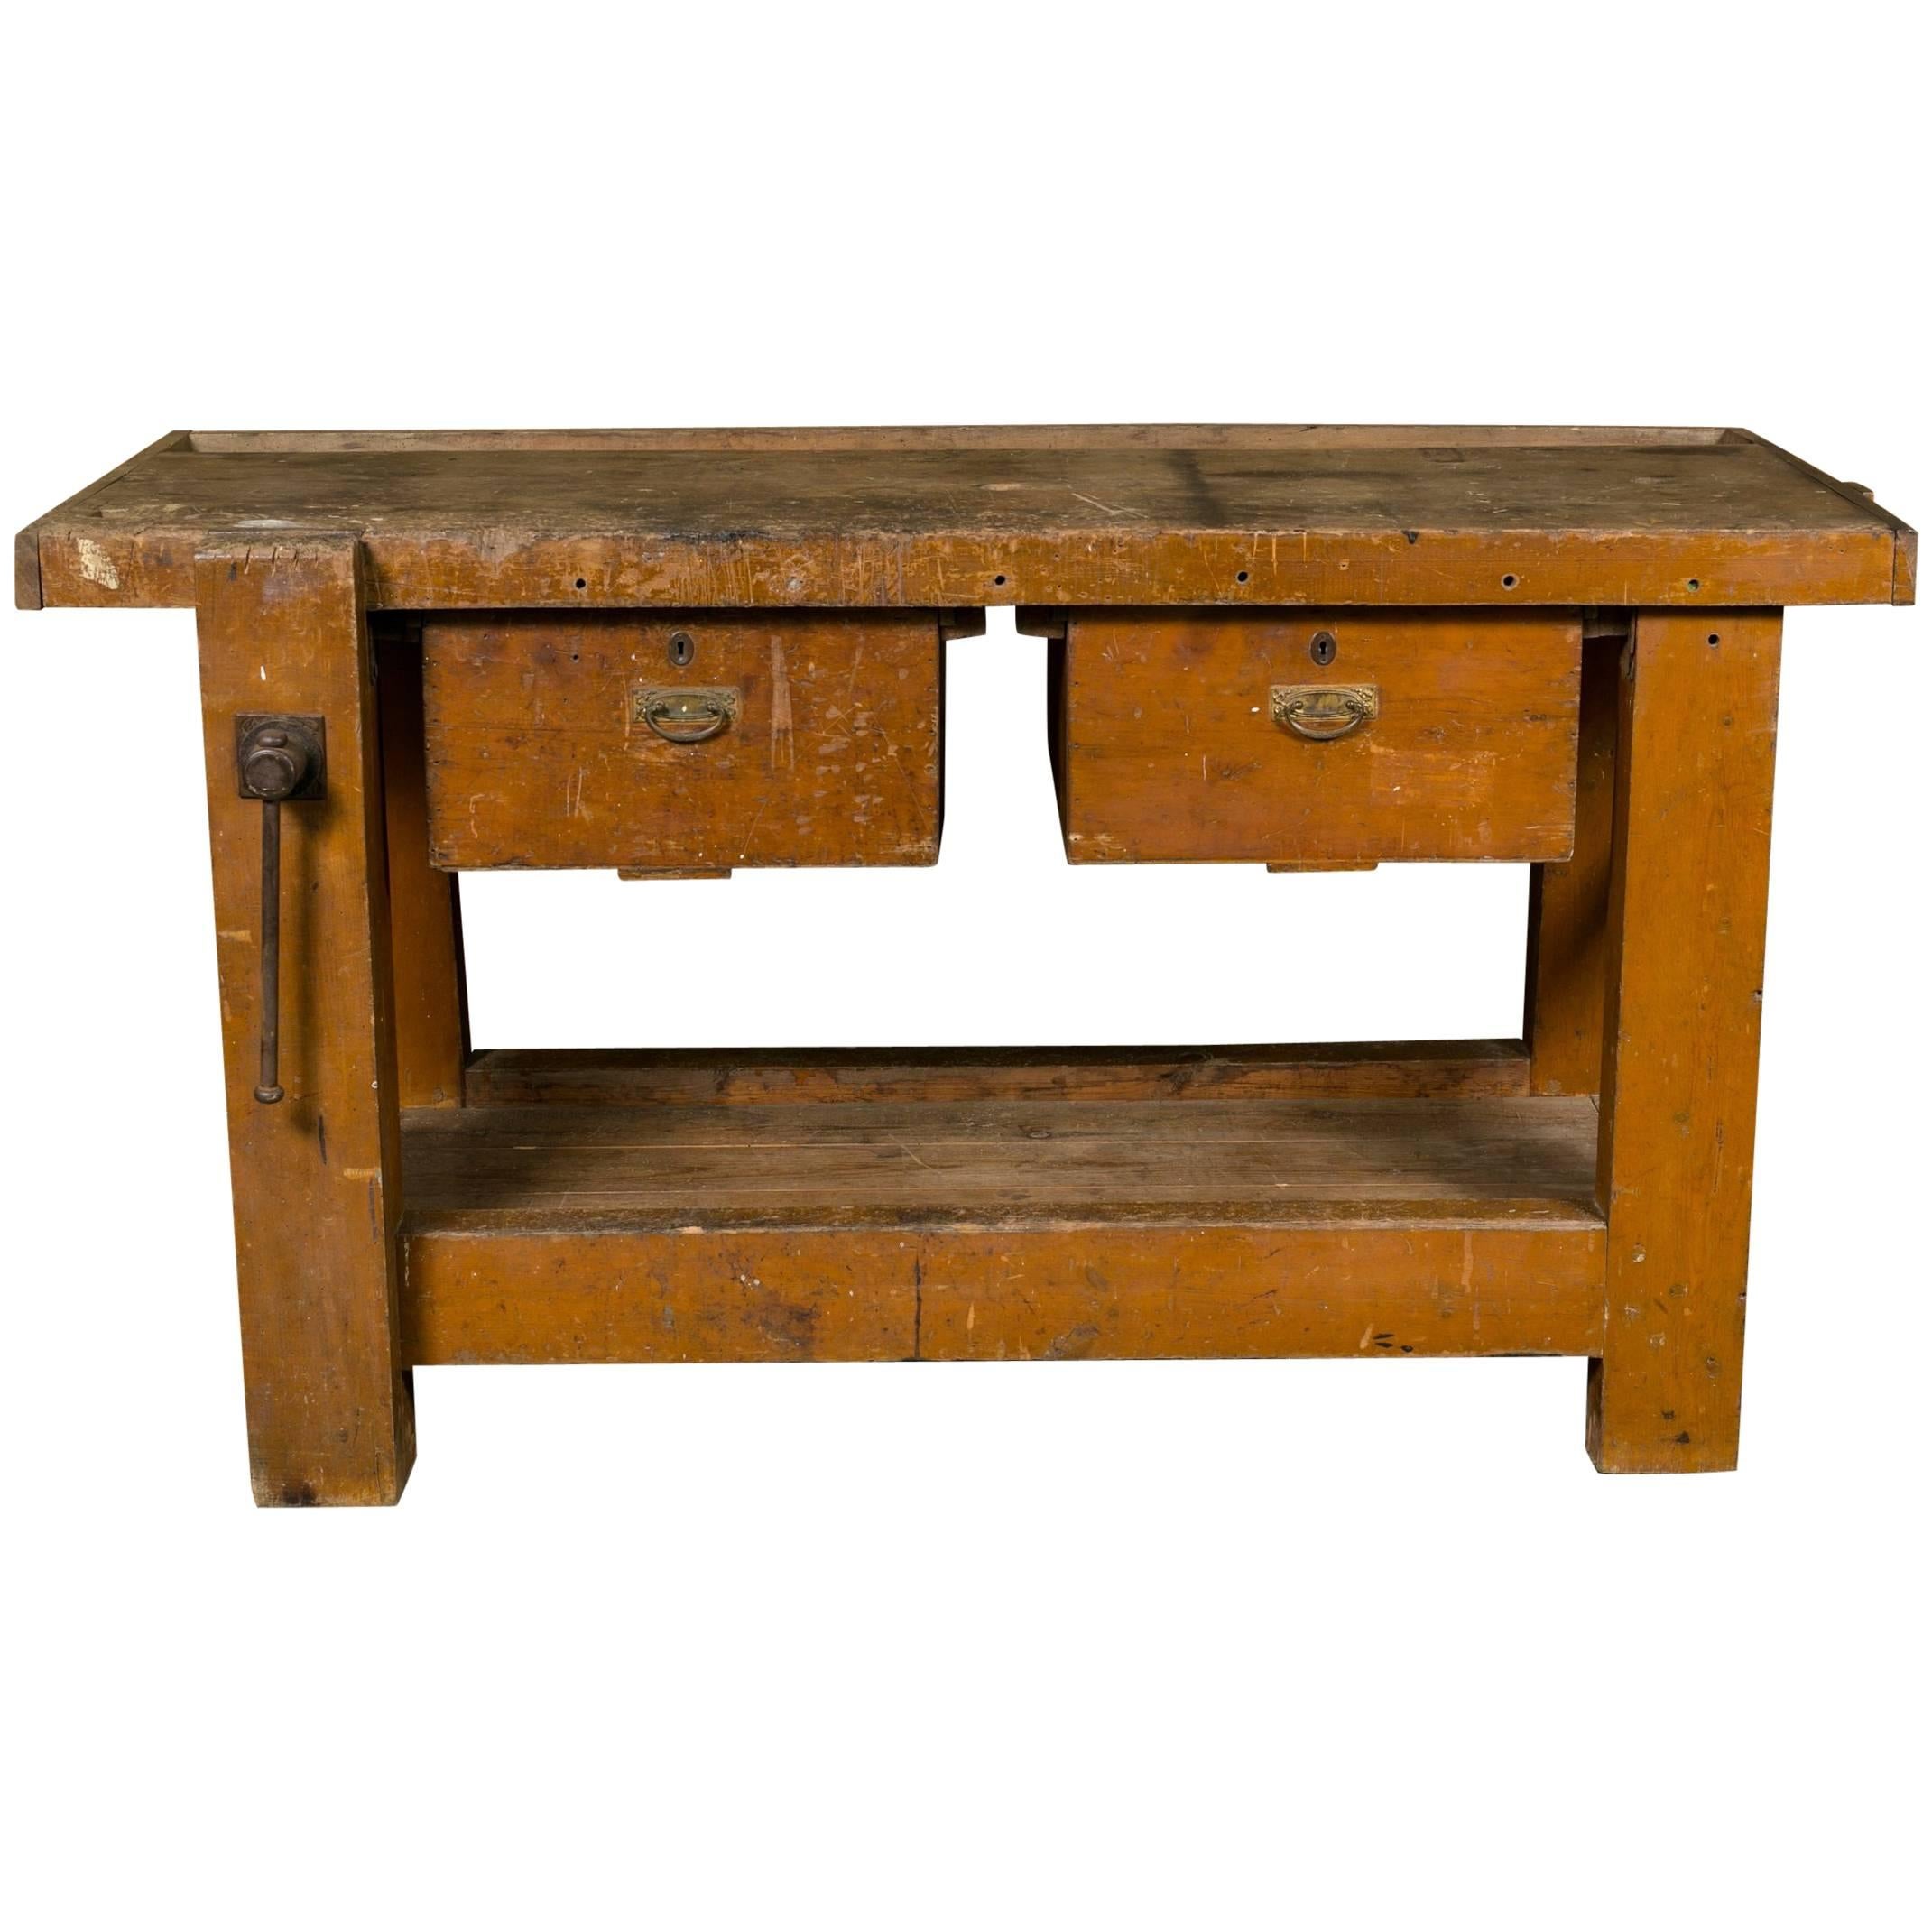 Antique Work Table with Two Drawers from Belgium, circa 1900